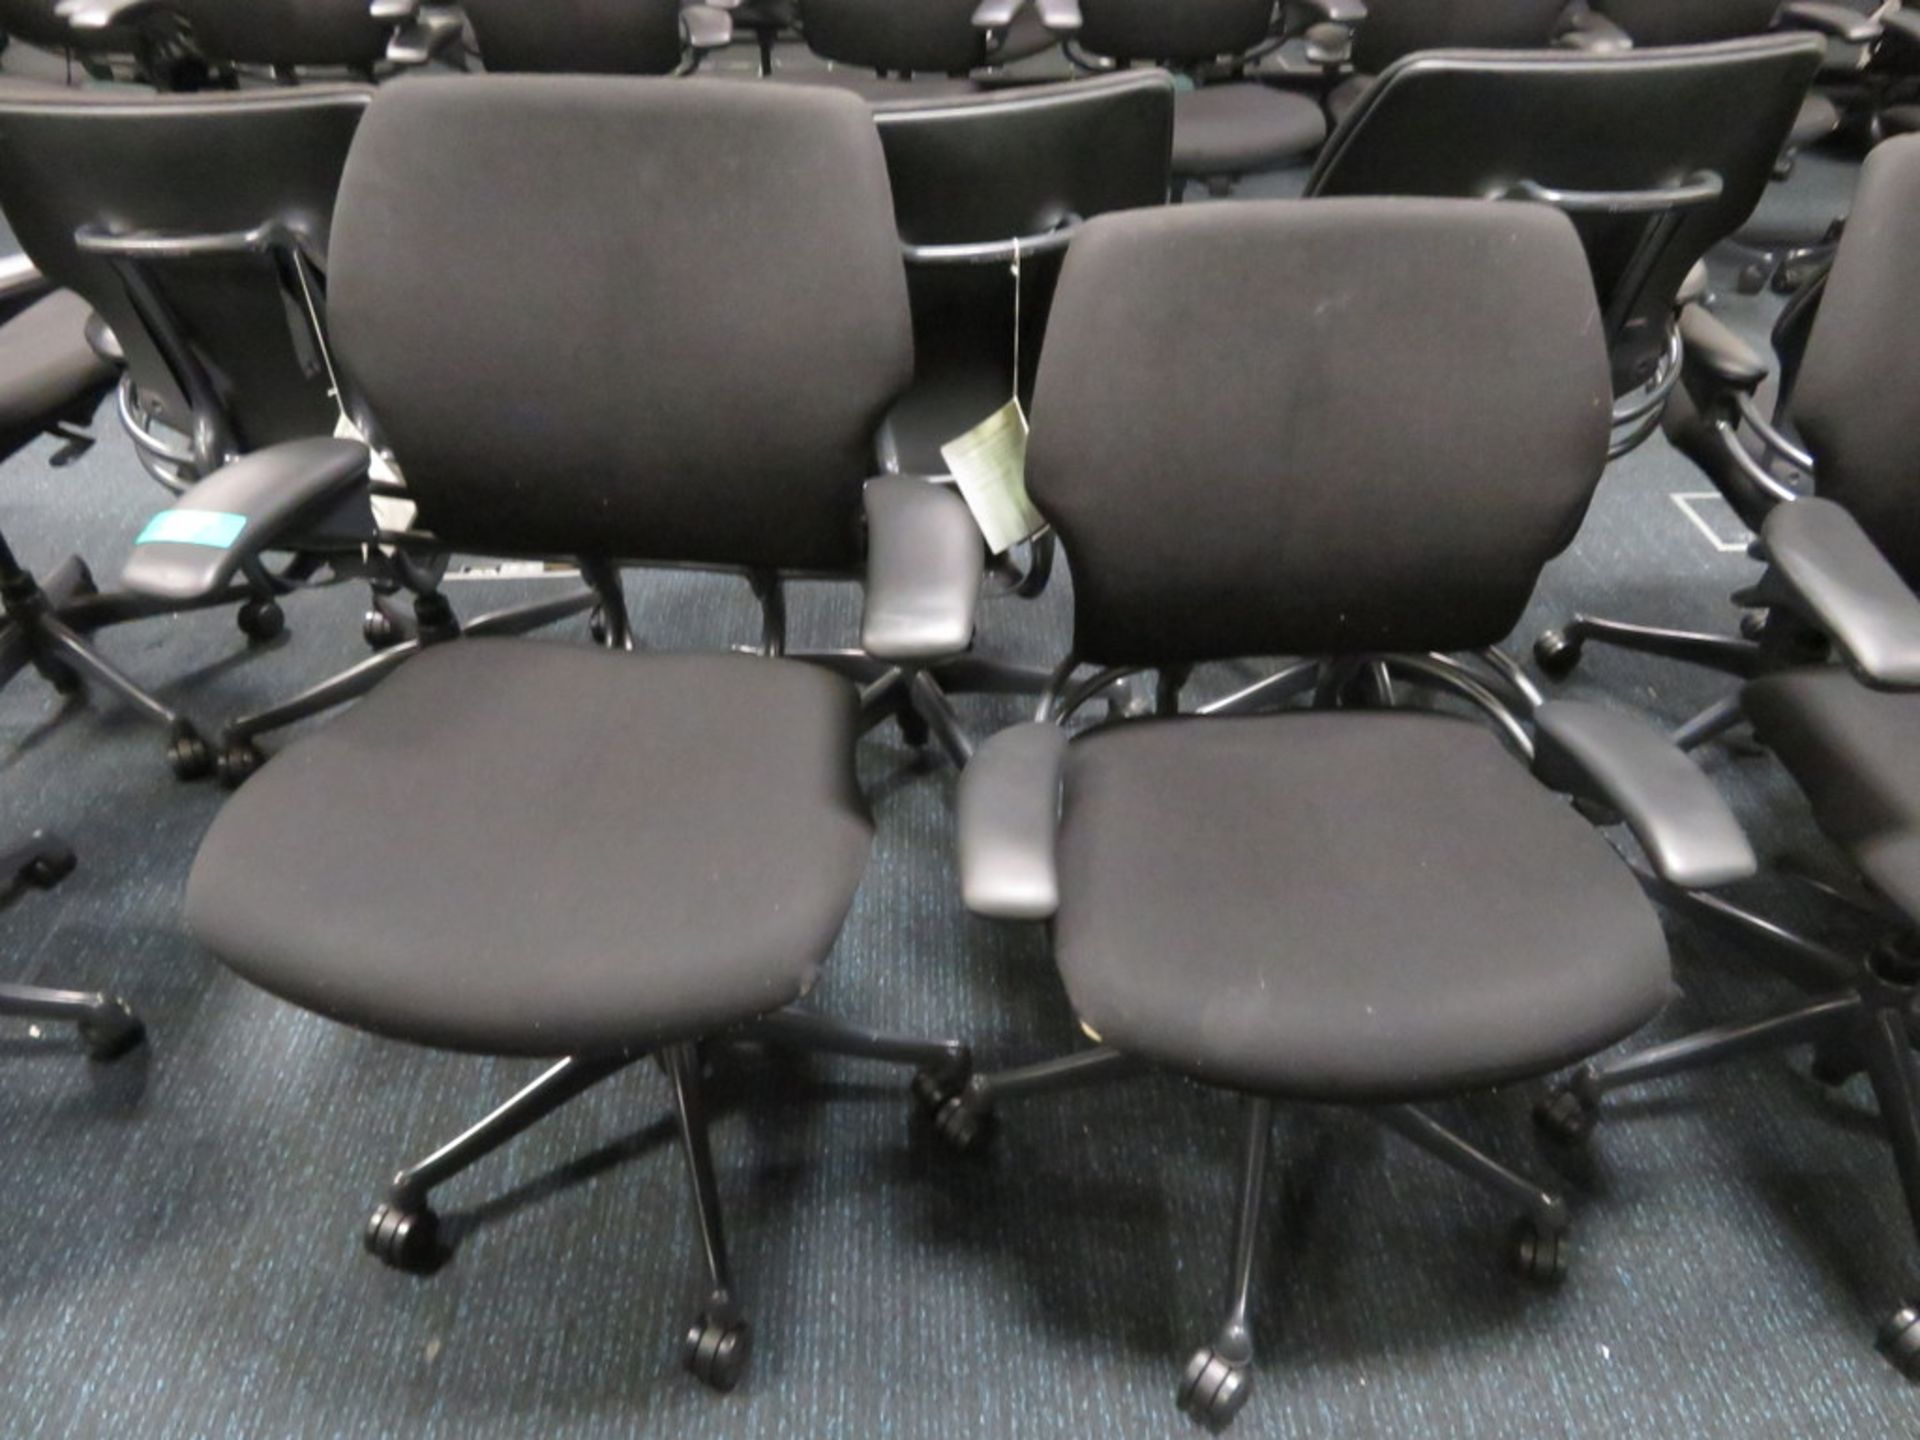 4x Humanscale Freedom Task Office Swivel Chairs. Varying Condition. - Image 2 of 5